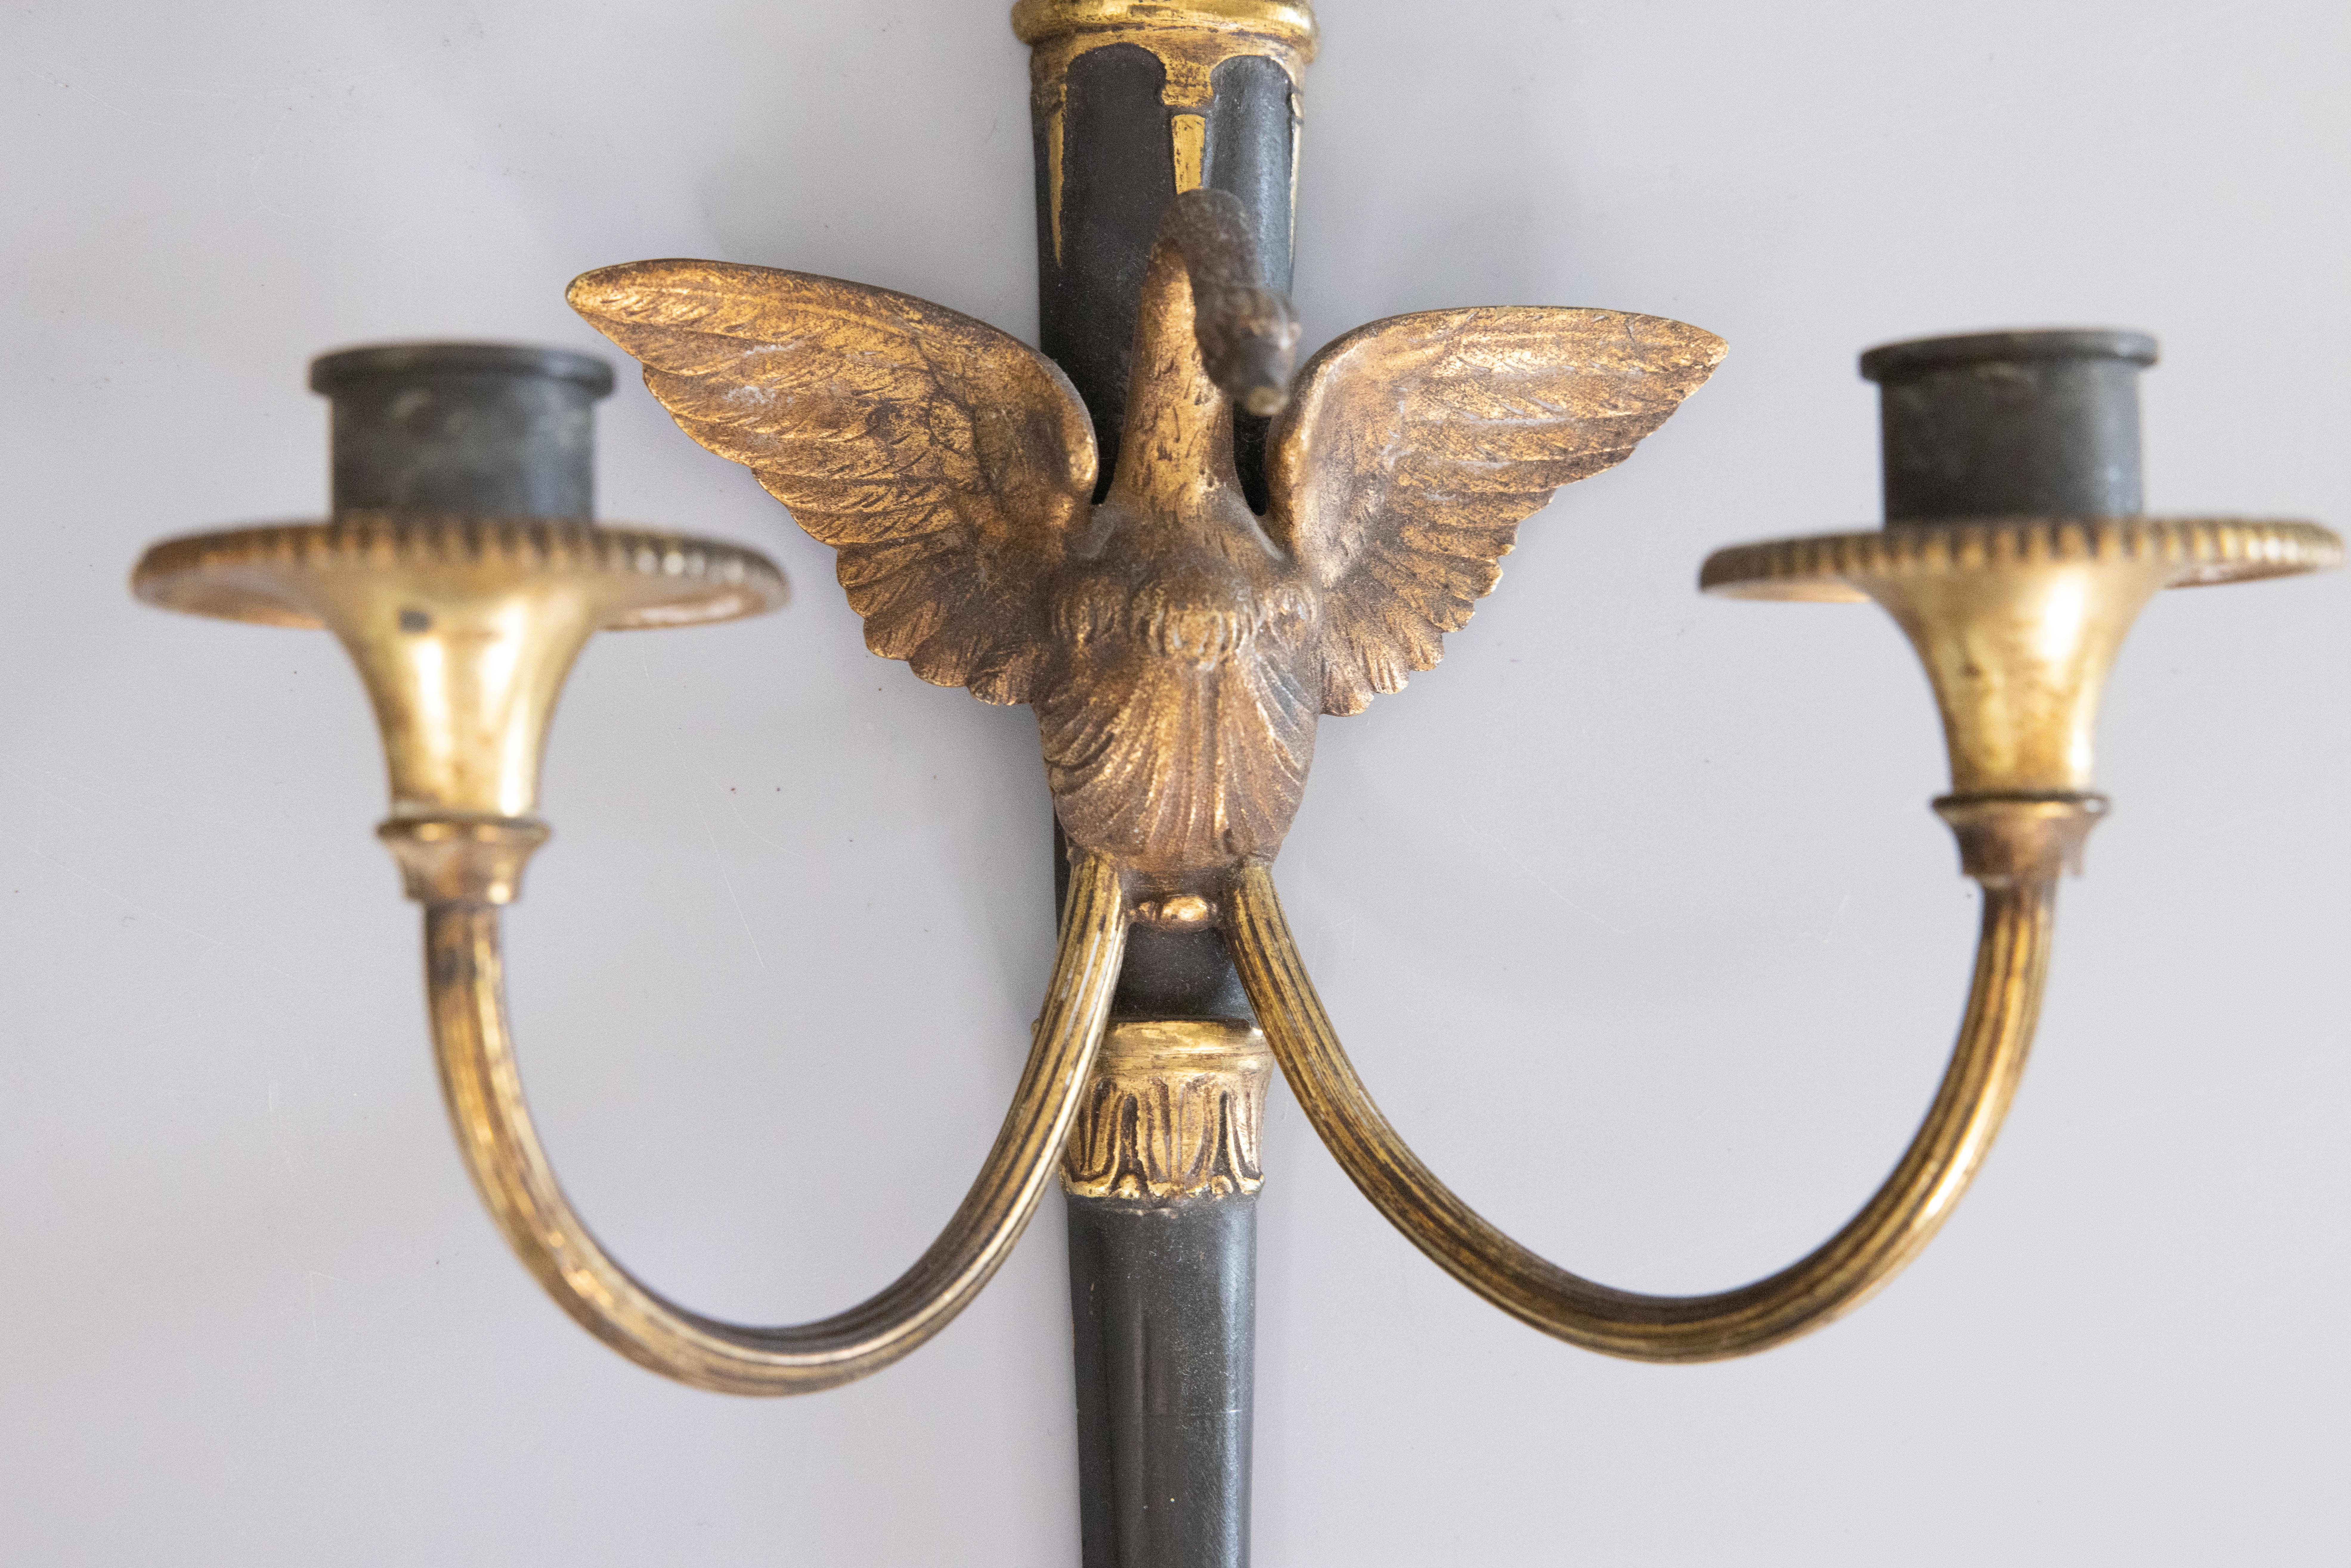 Pair of Antique French Empire Style Gilt Bronze Sconces With Swans & Torches 1